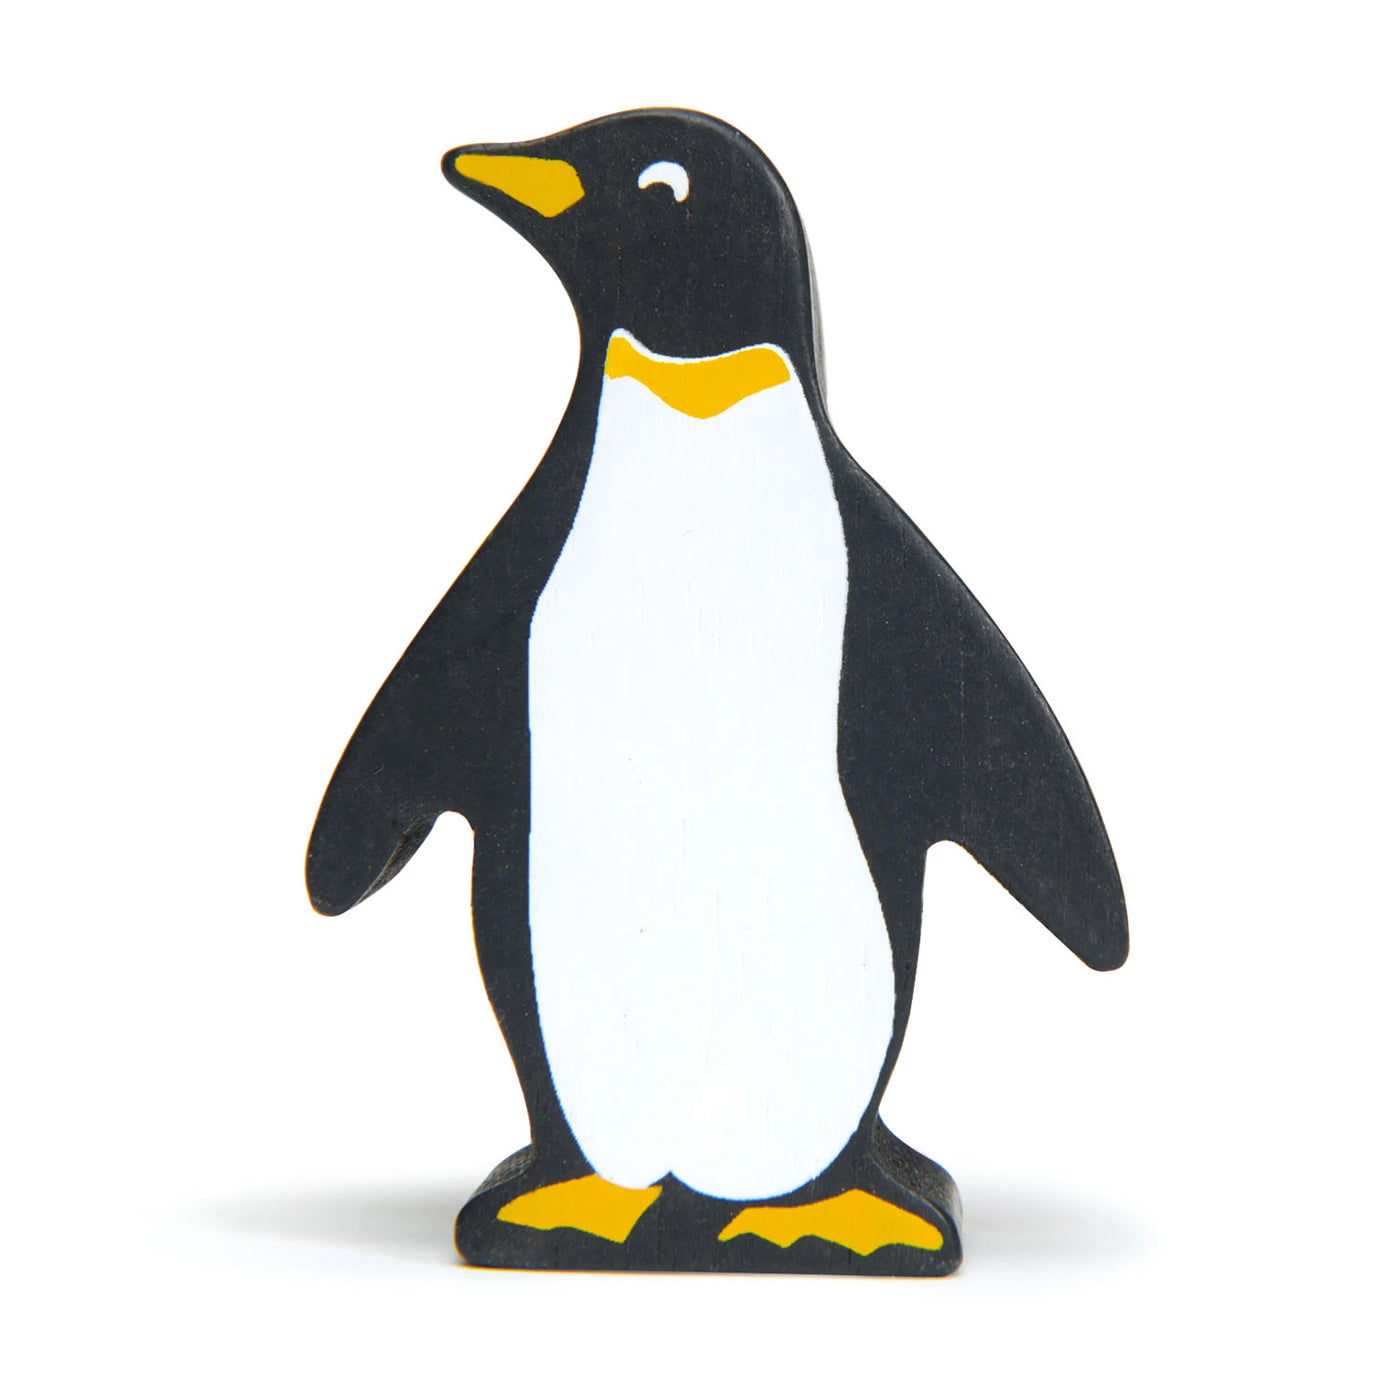 Wooden Penguin toy for kids made of eco-friendly wood